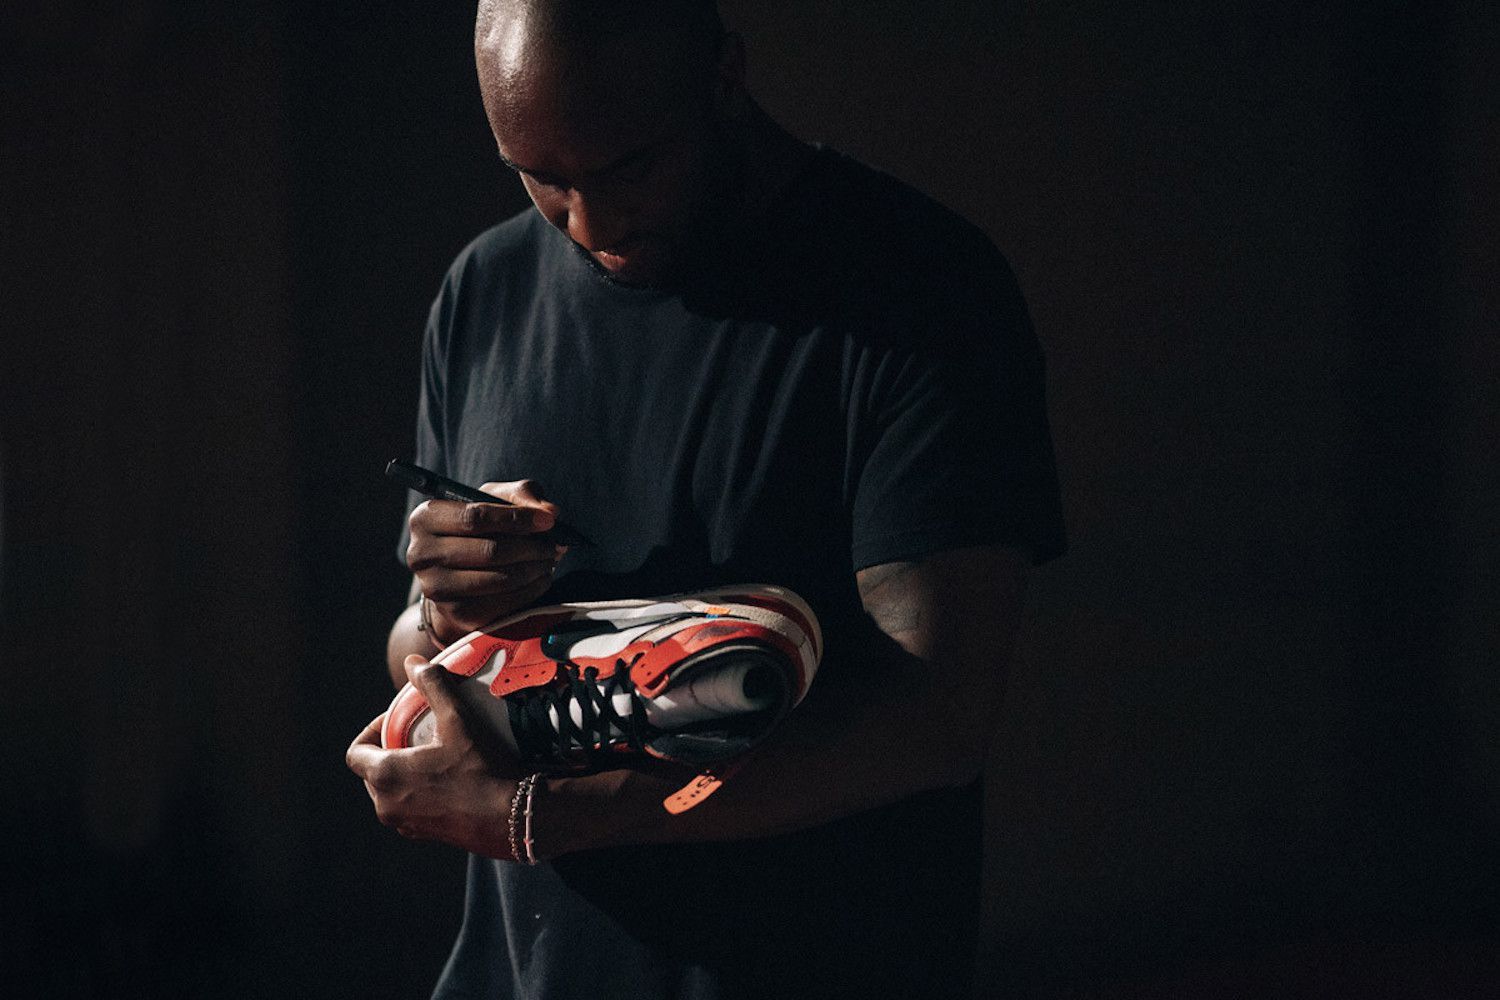 Virgil Abloh's new book 'ICONS' goes deep on his game-changing Nike collab